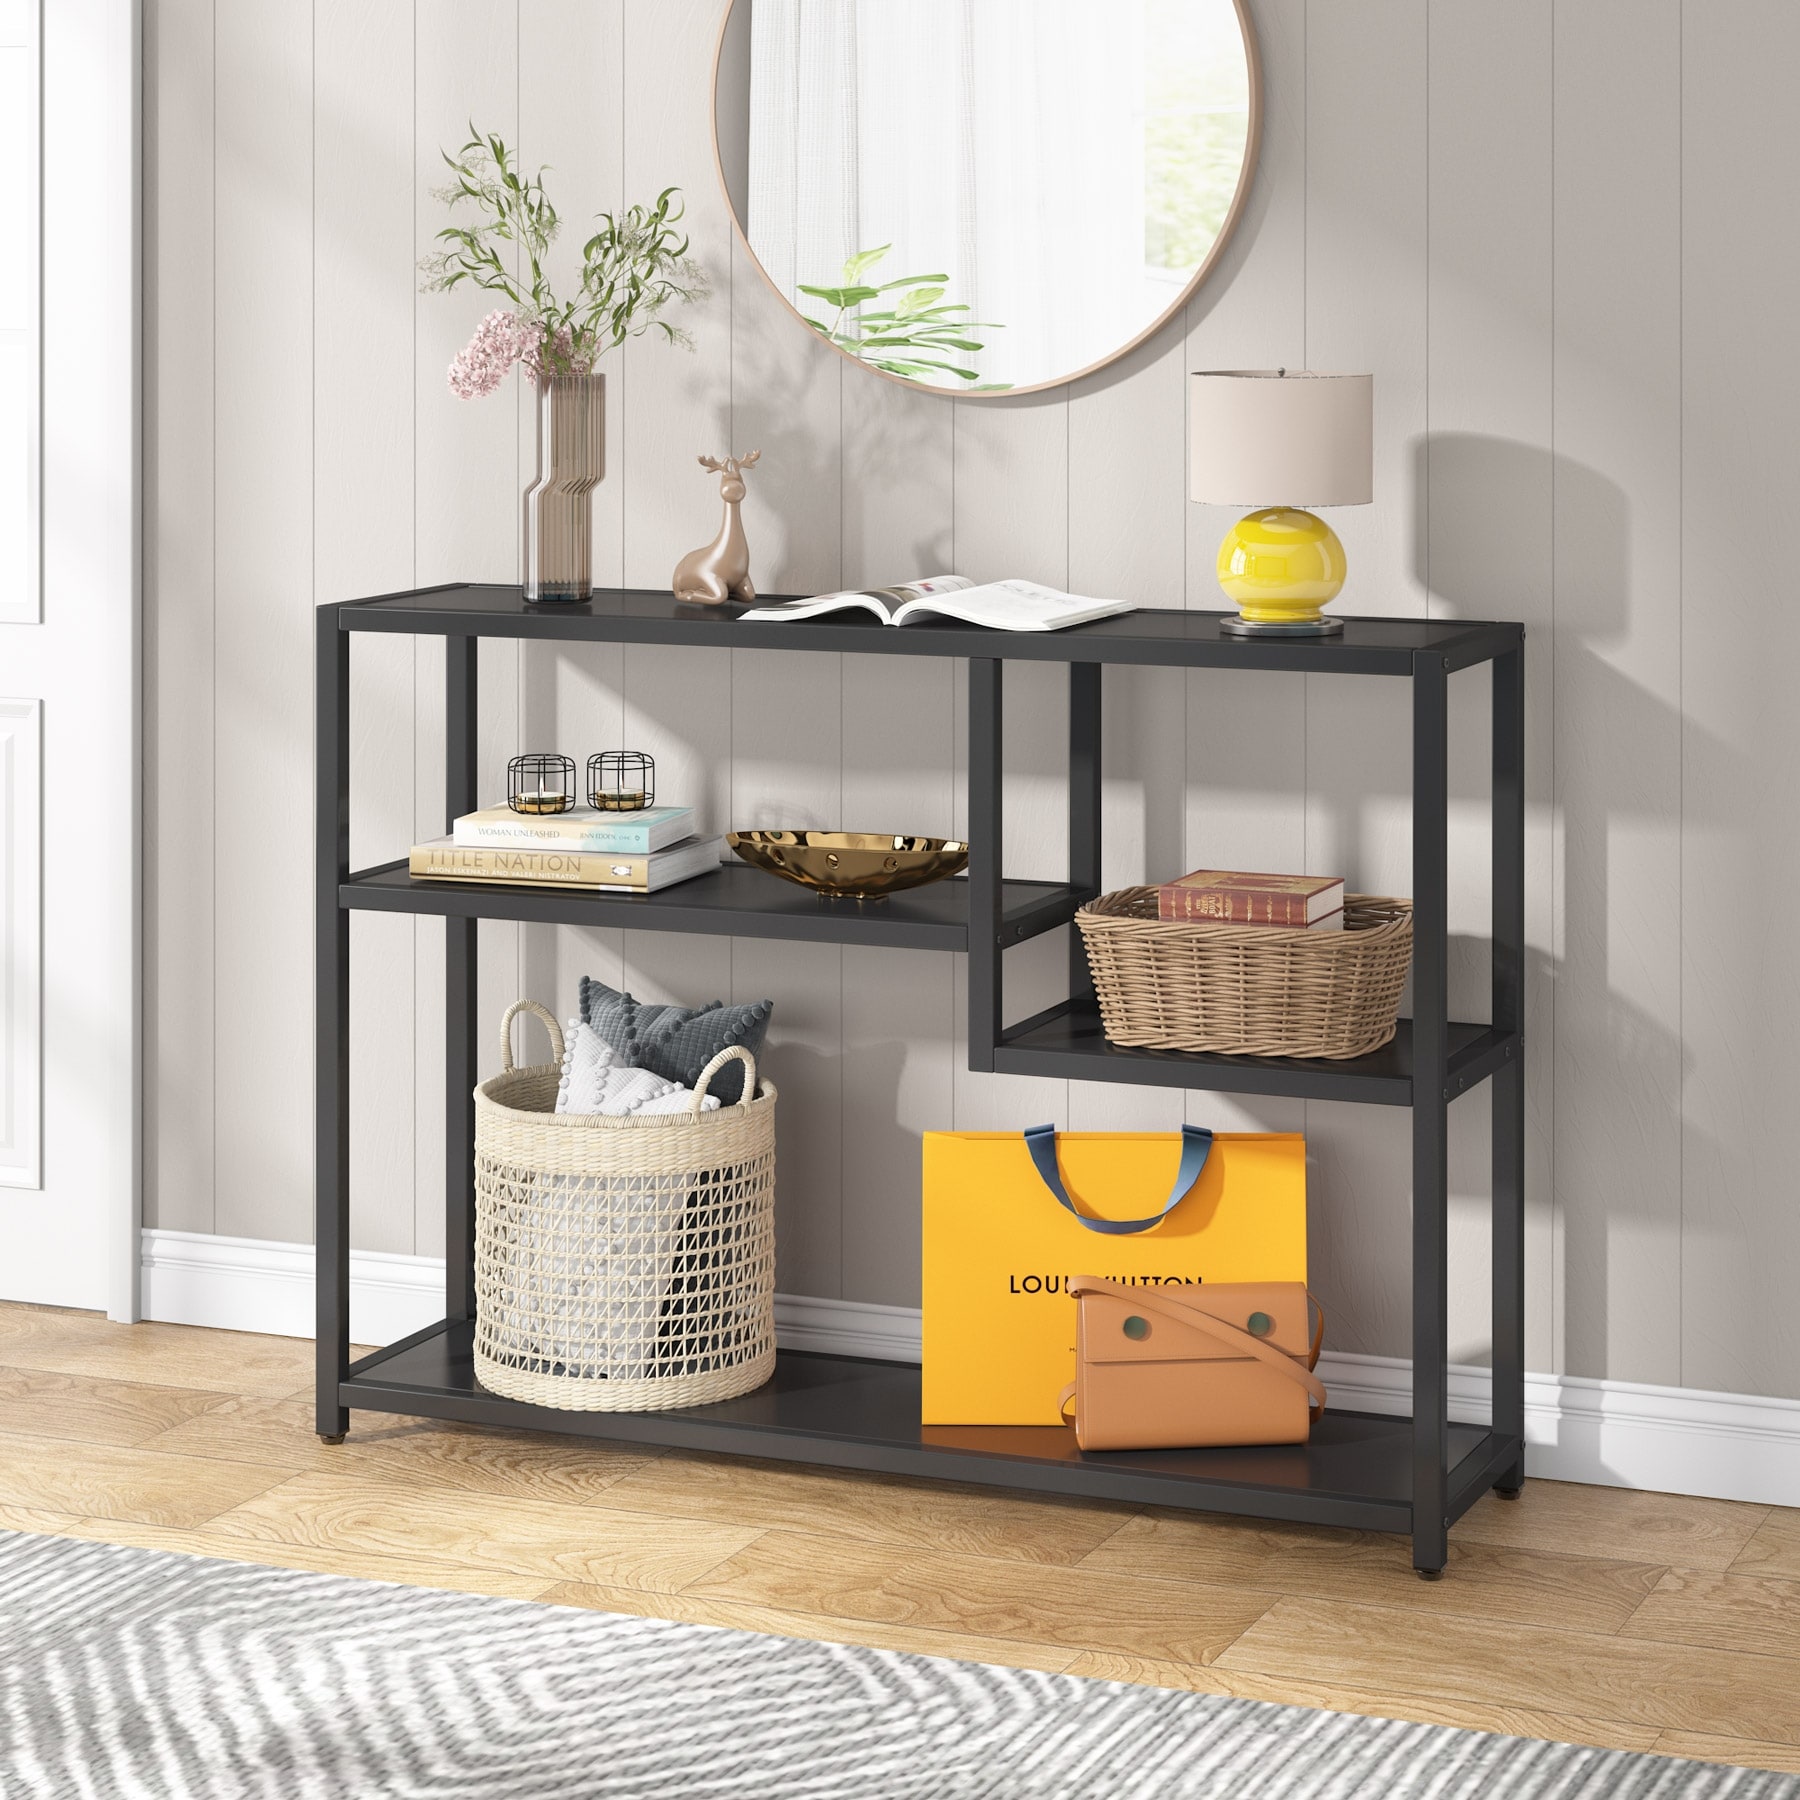 Black/ White 43 Inch Console Table with Storage Shelves,Small